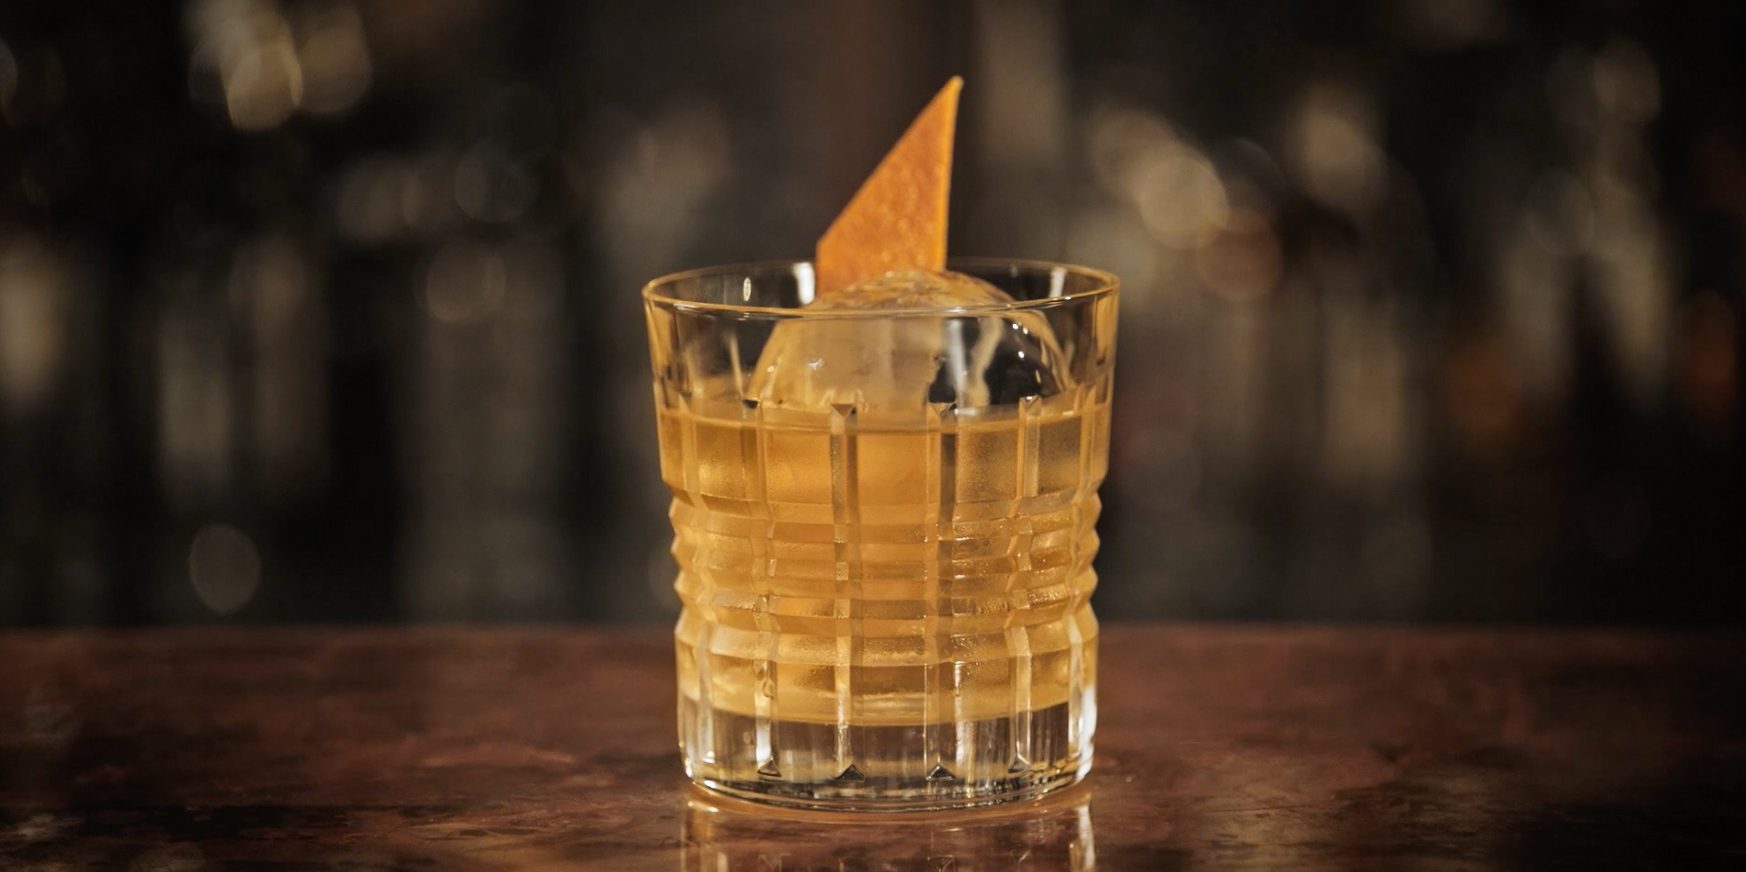 Old Fashioned Cocktail Recipe: Scotch Whisky - The Glenlivet